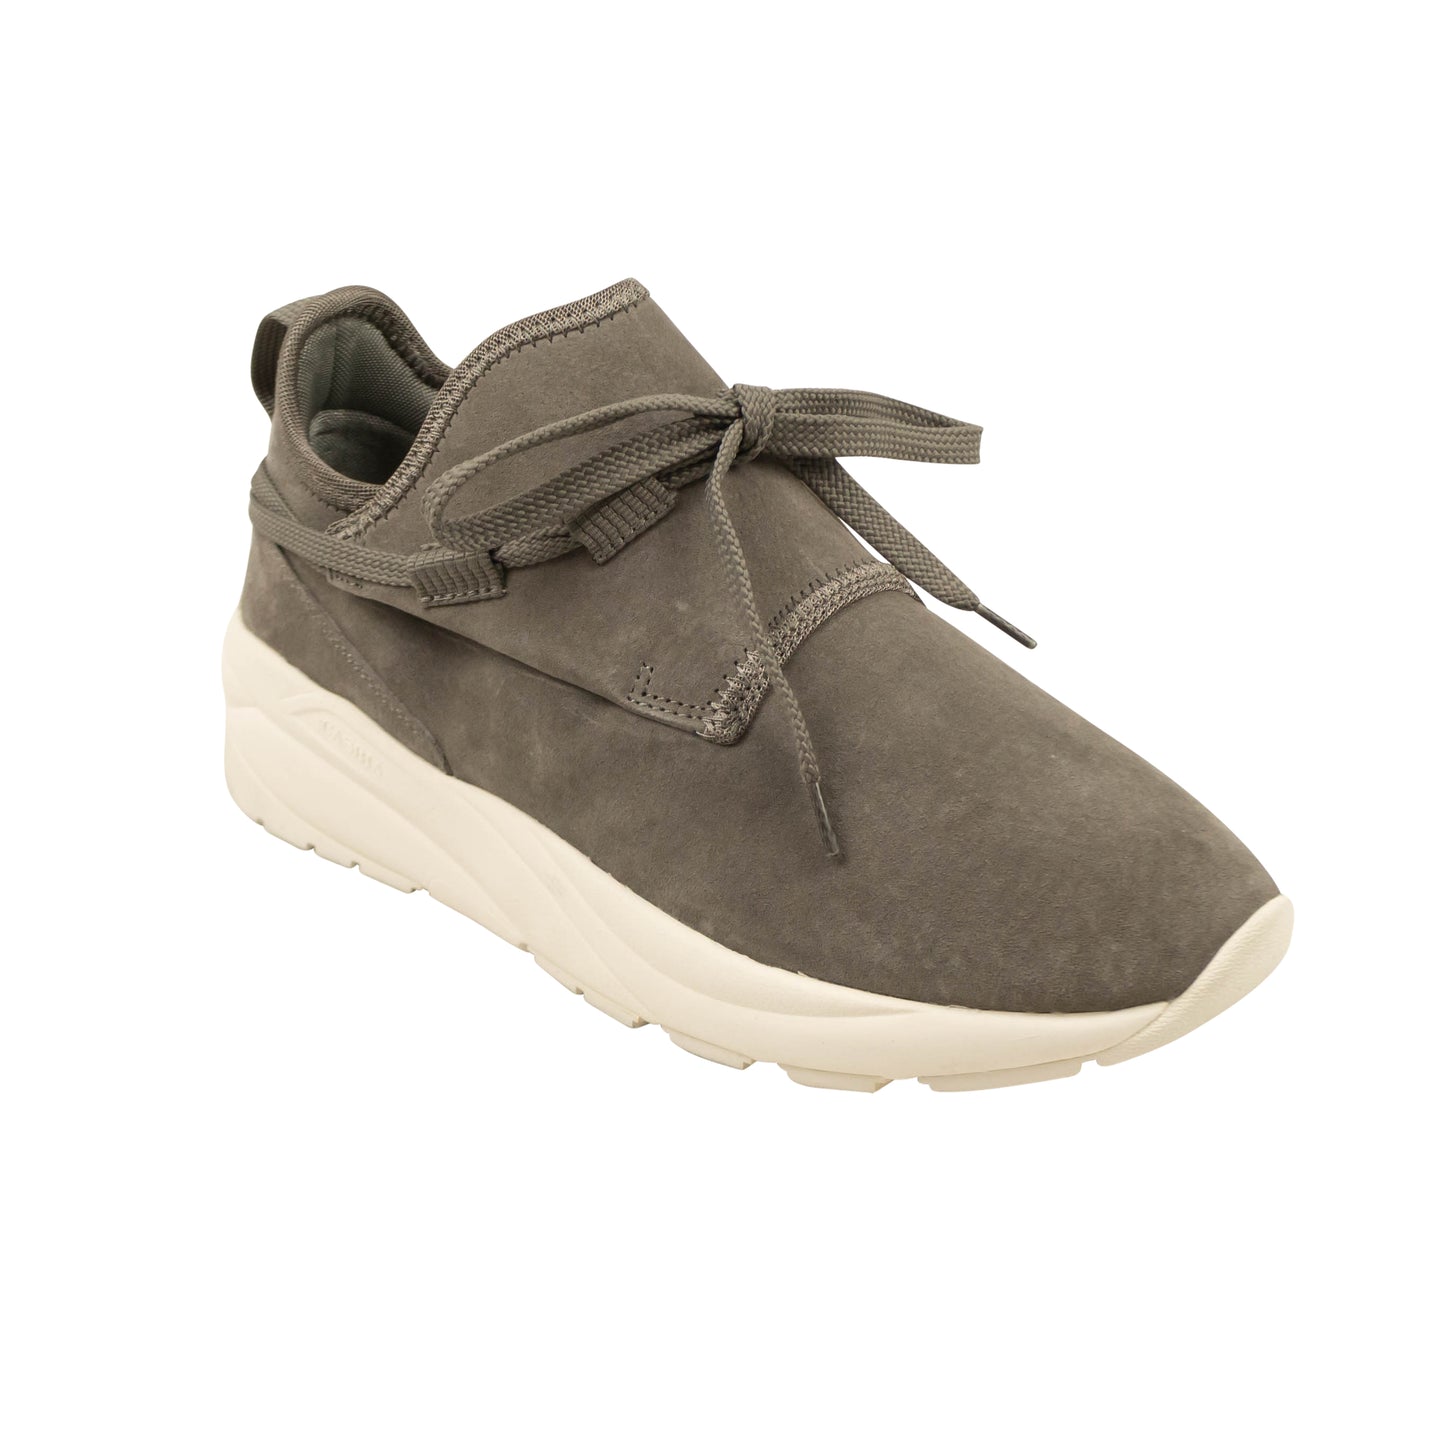 Casbia William Rbt Sneakers - Gray